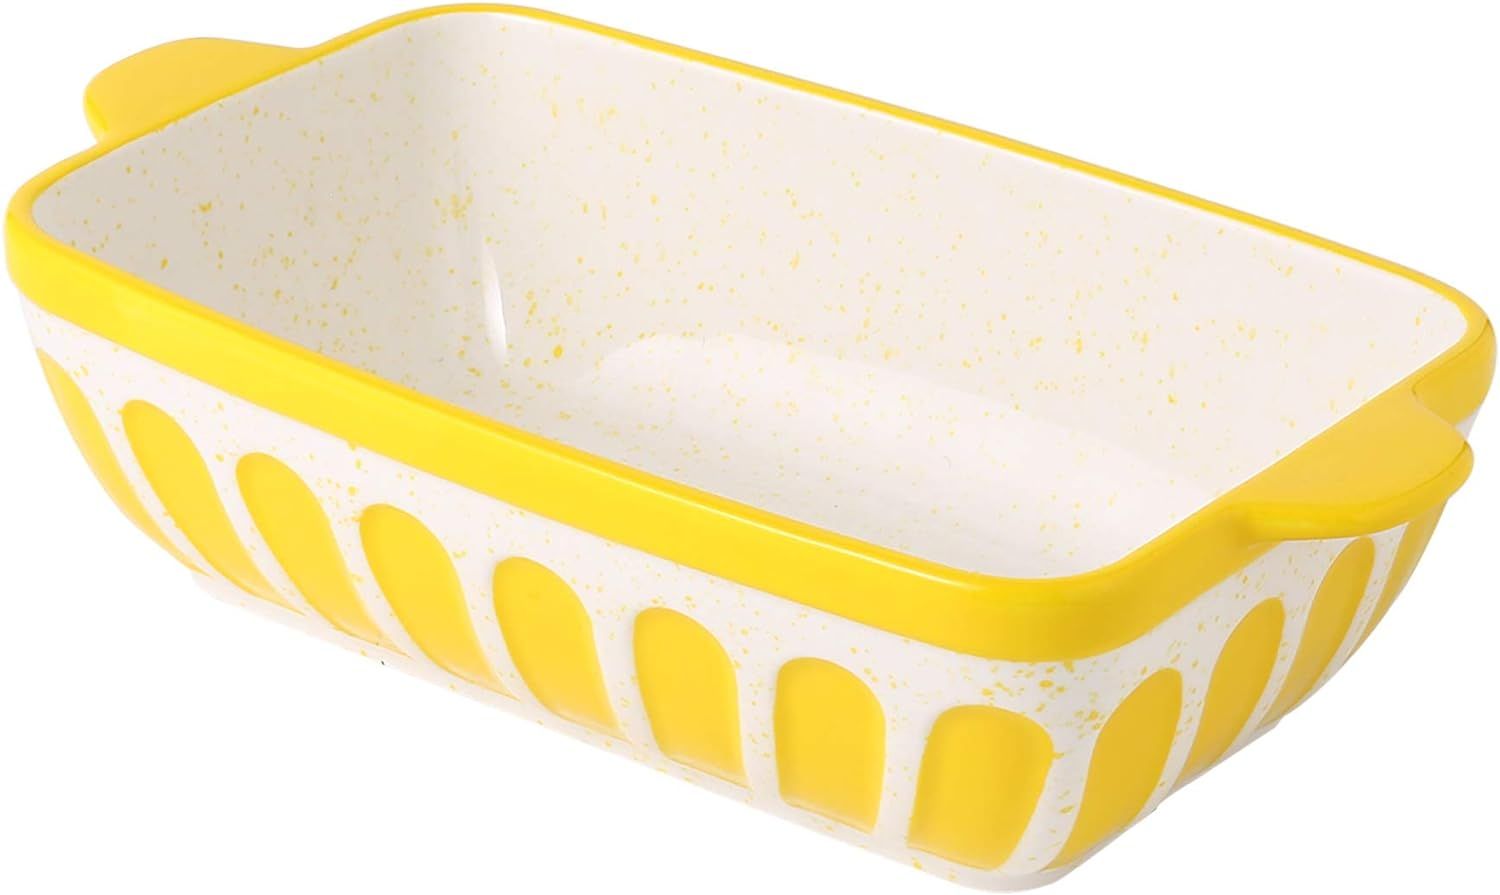 Hand Painted Ceramic Loaf Pans Bread Baking Dish Toast Baking Pan for Baker Home Kitchen -Yellow | Amazon (US)